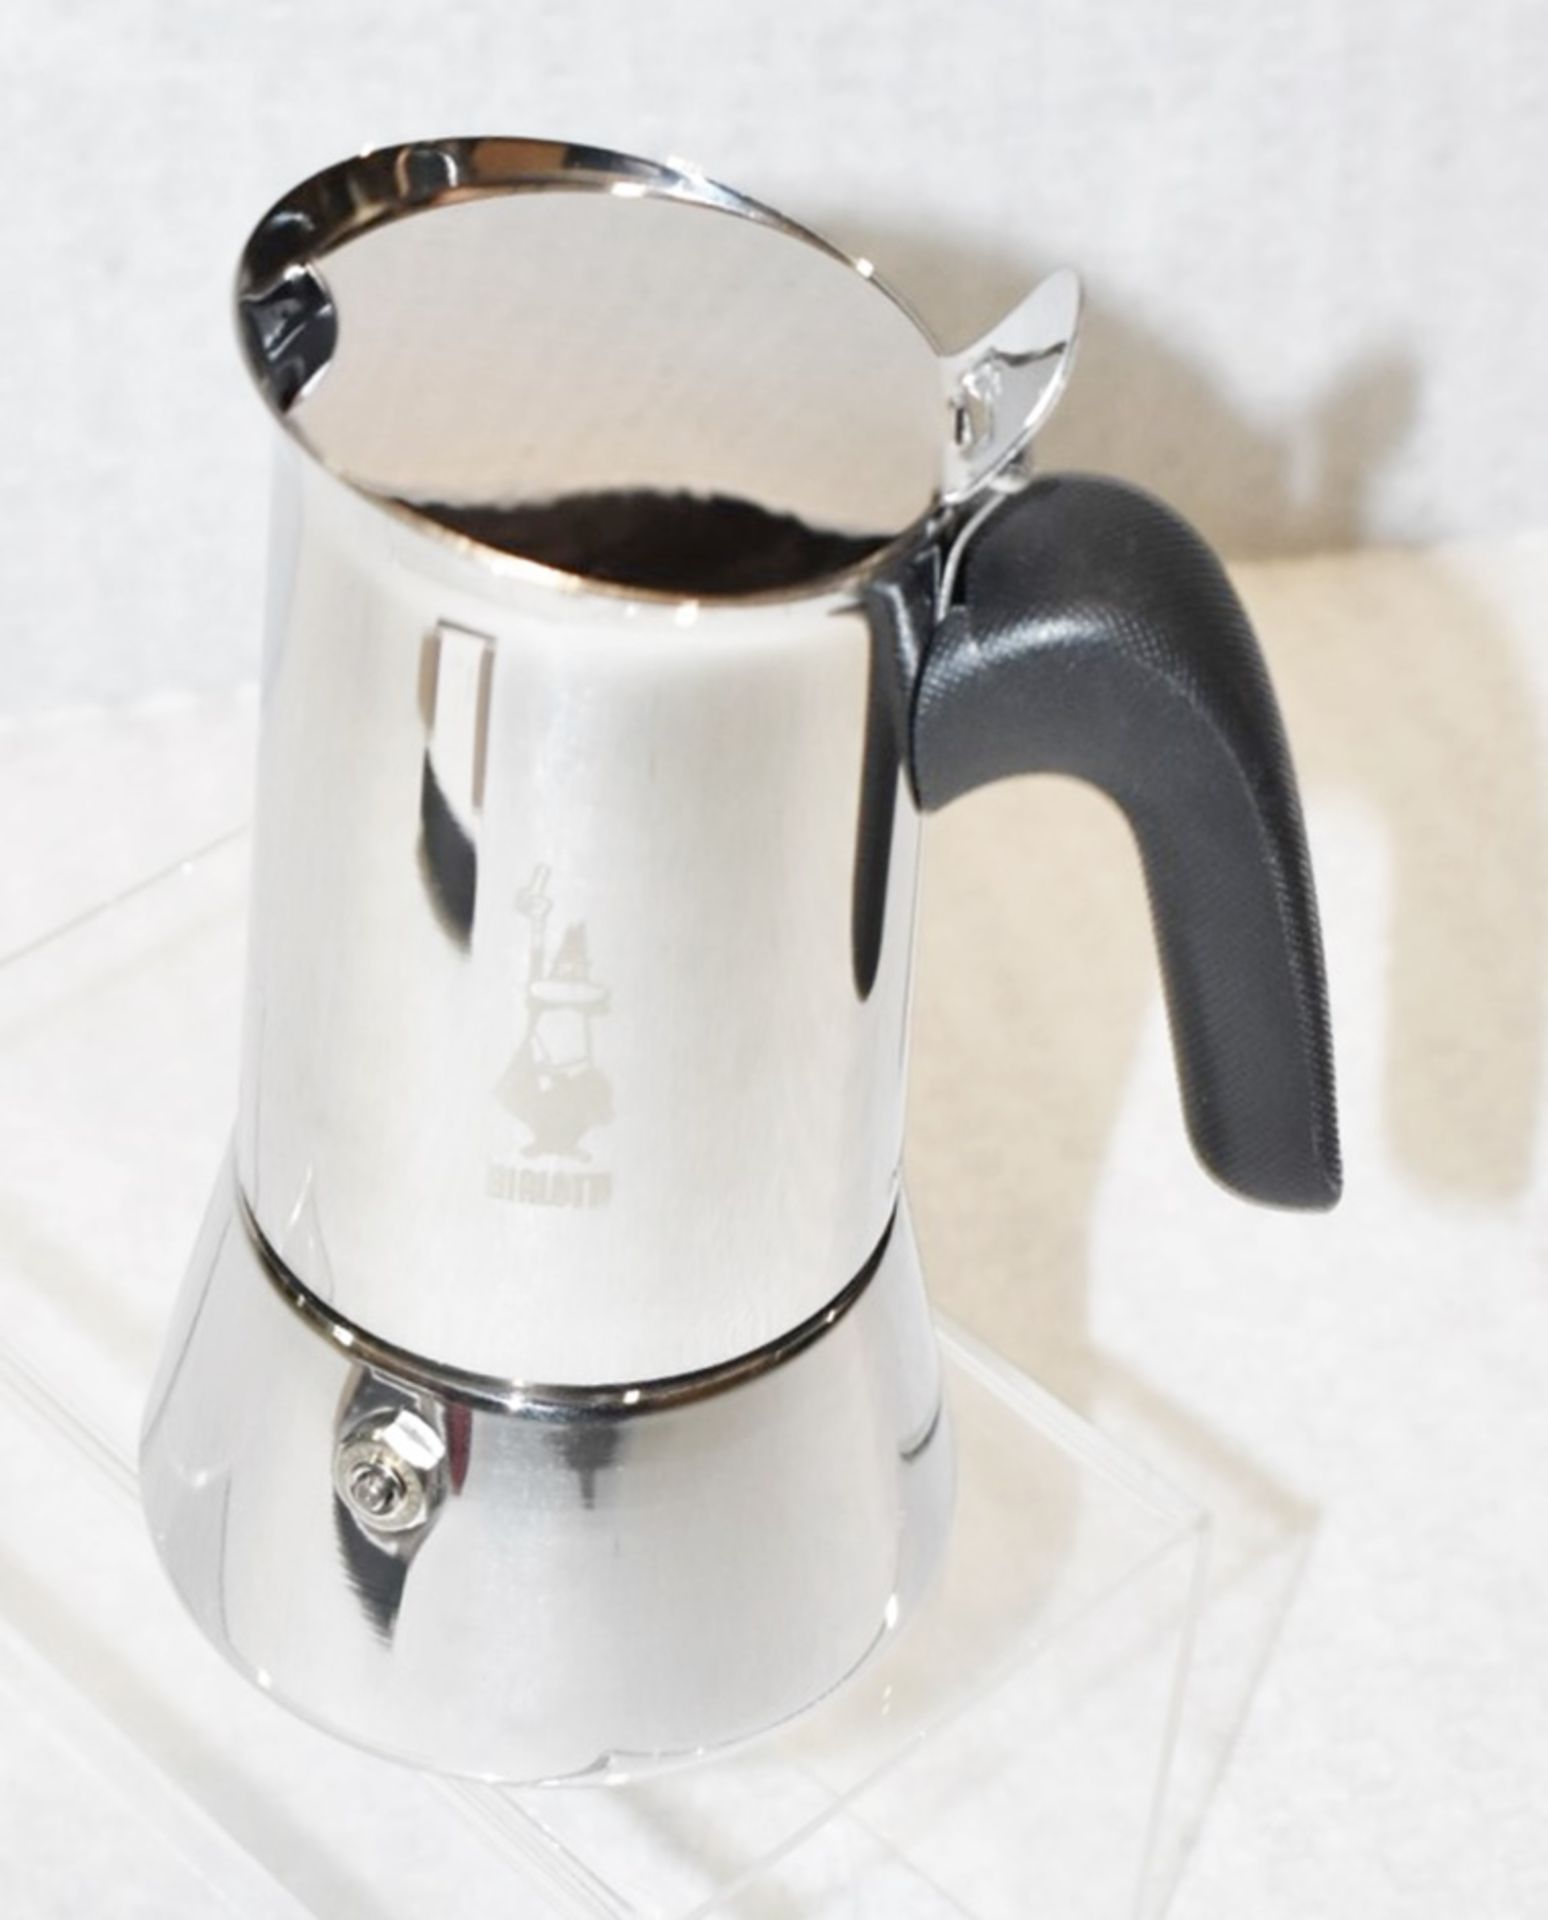 1 x BIALETTI 'Venus' Italian Induction 4-Cup Stainless Steel Cafetière - Original Price £45.95 - Image 3 of 8